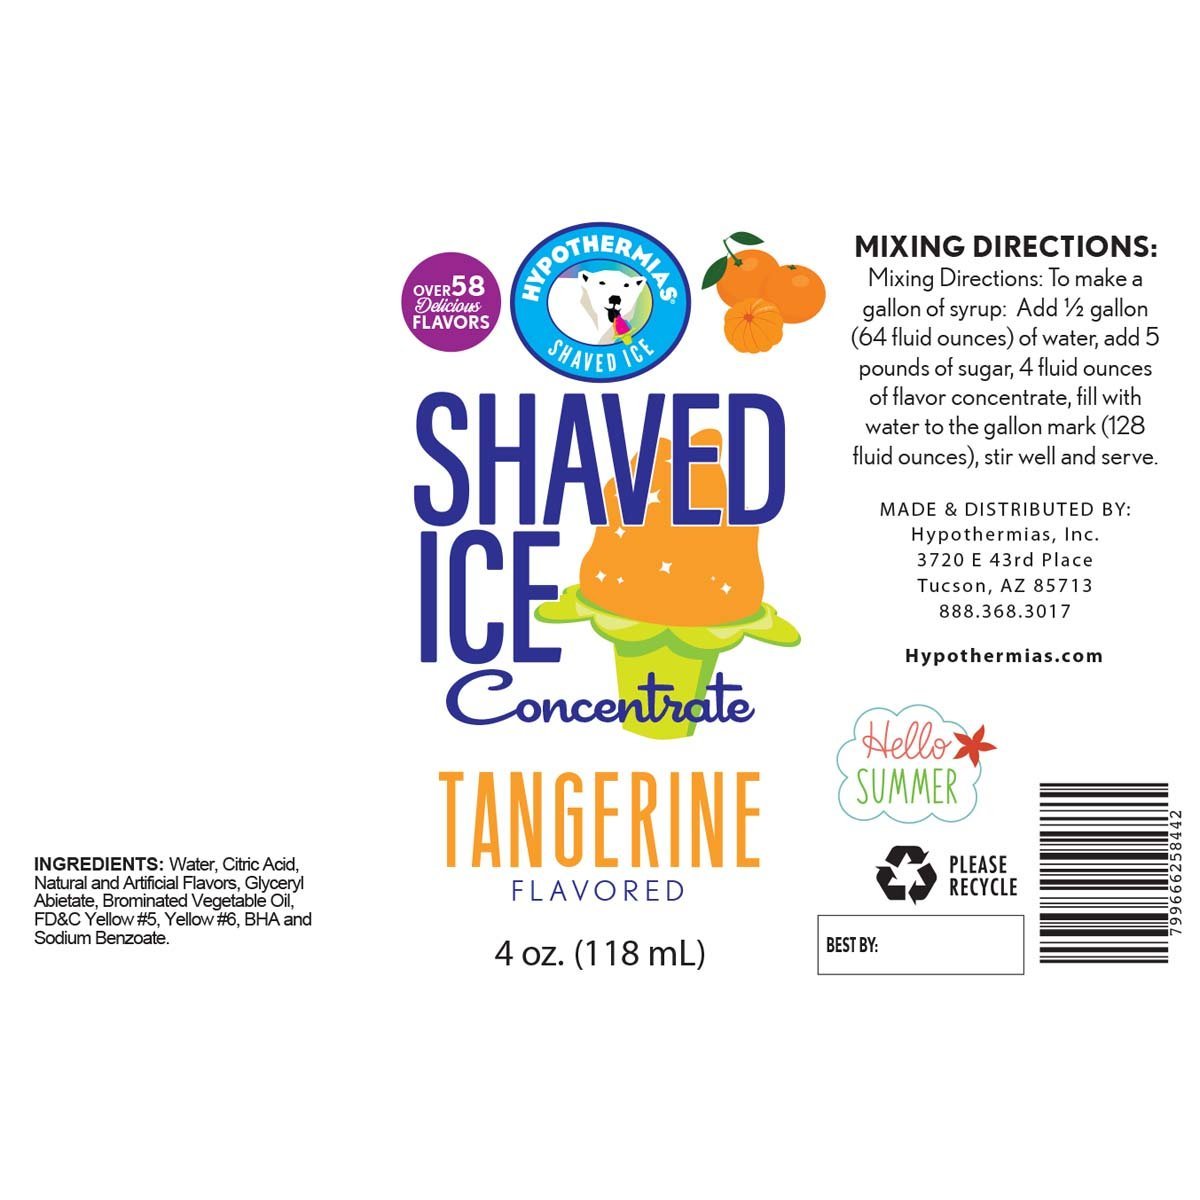 Hypothermias tangerine shaved ice or snow cone flavor syrup concentrate ingredient label.